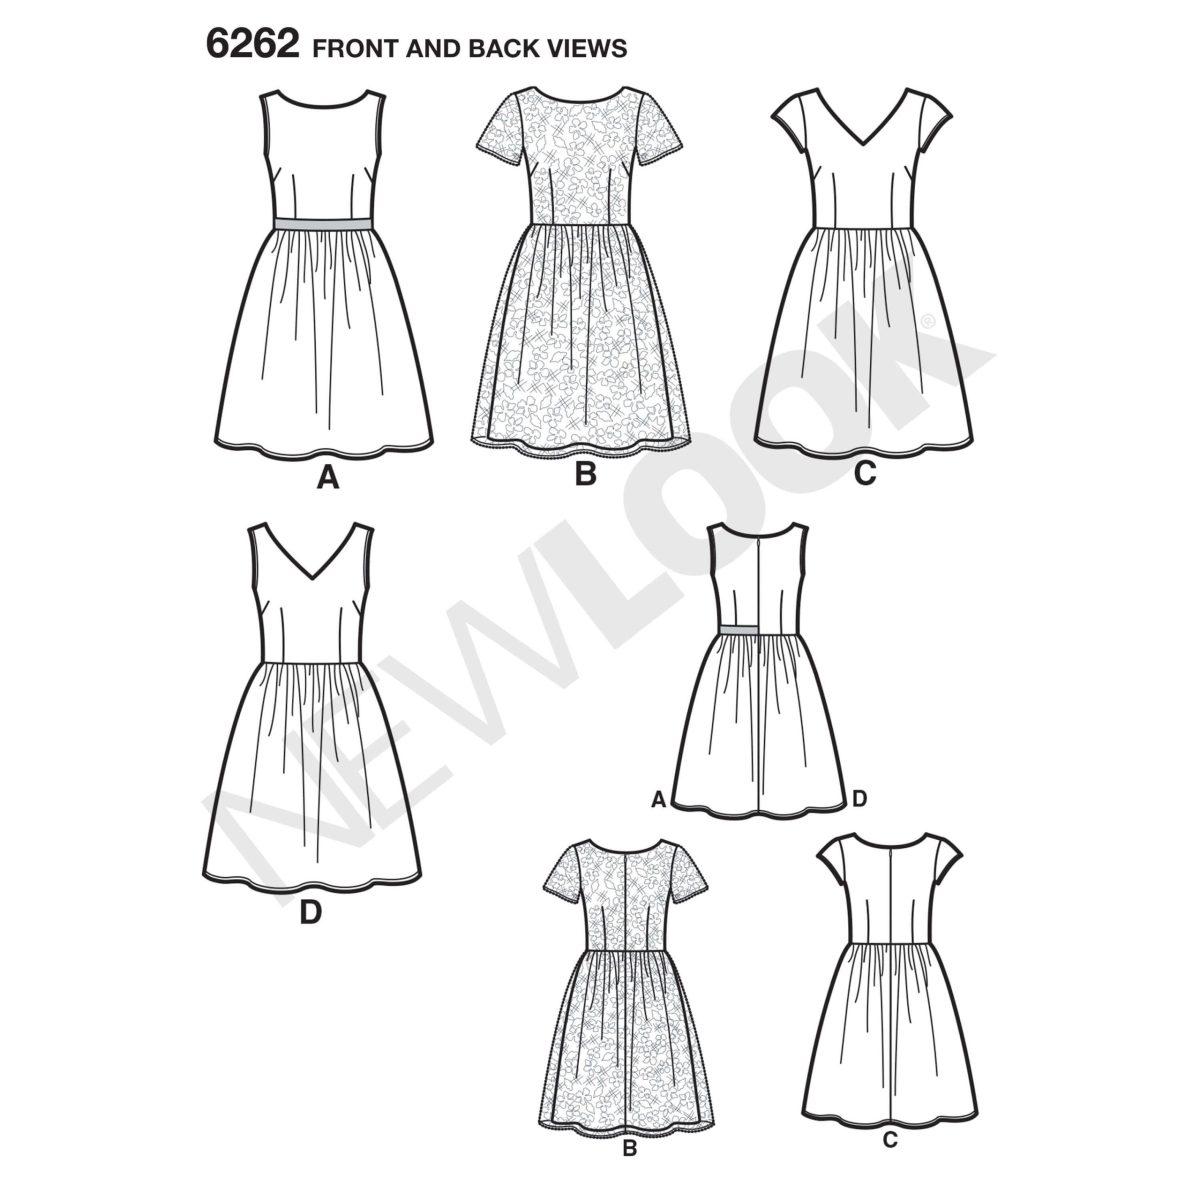 New Look Sewing Pattern N6262 Misses' Dress with Neckline Variations